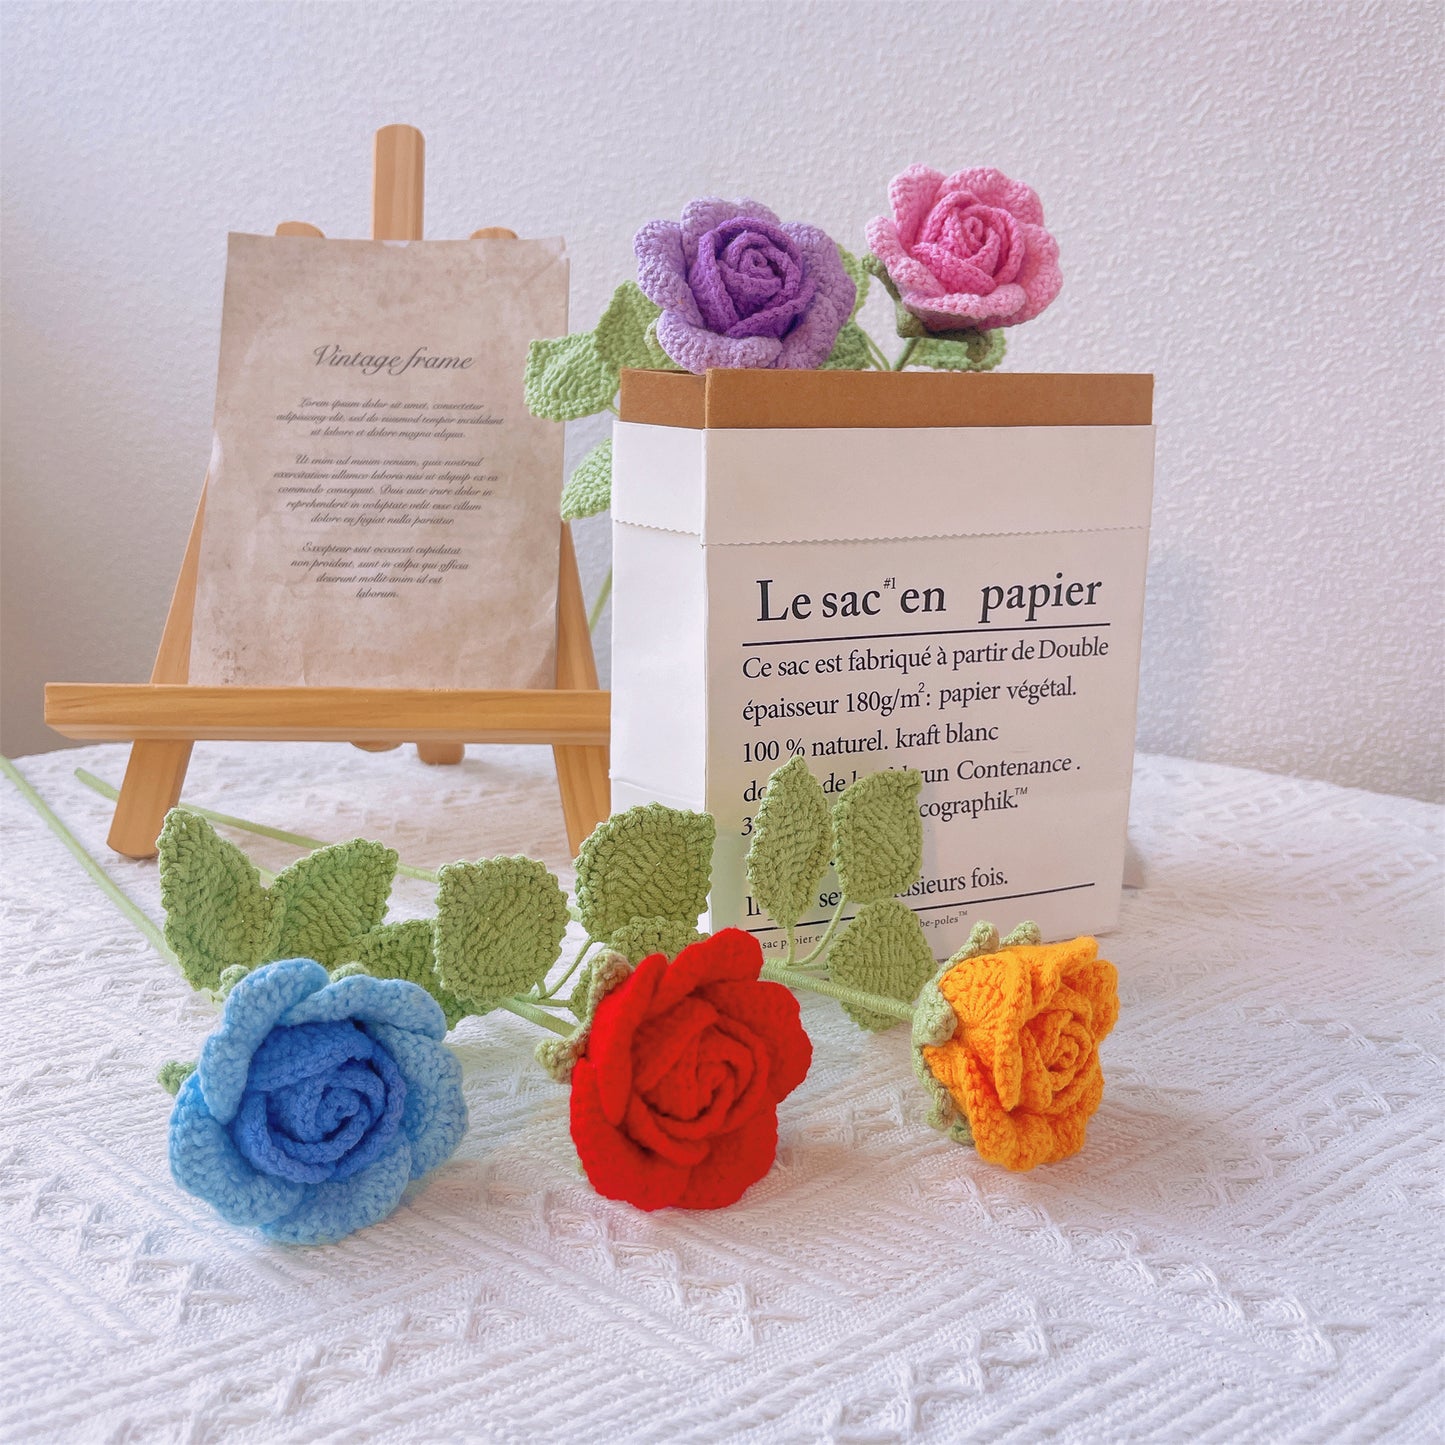 Rose Garden Delight: Handcrafted Crochet Roses for a Charming Home Decor